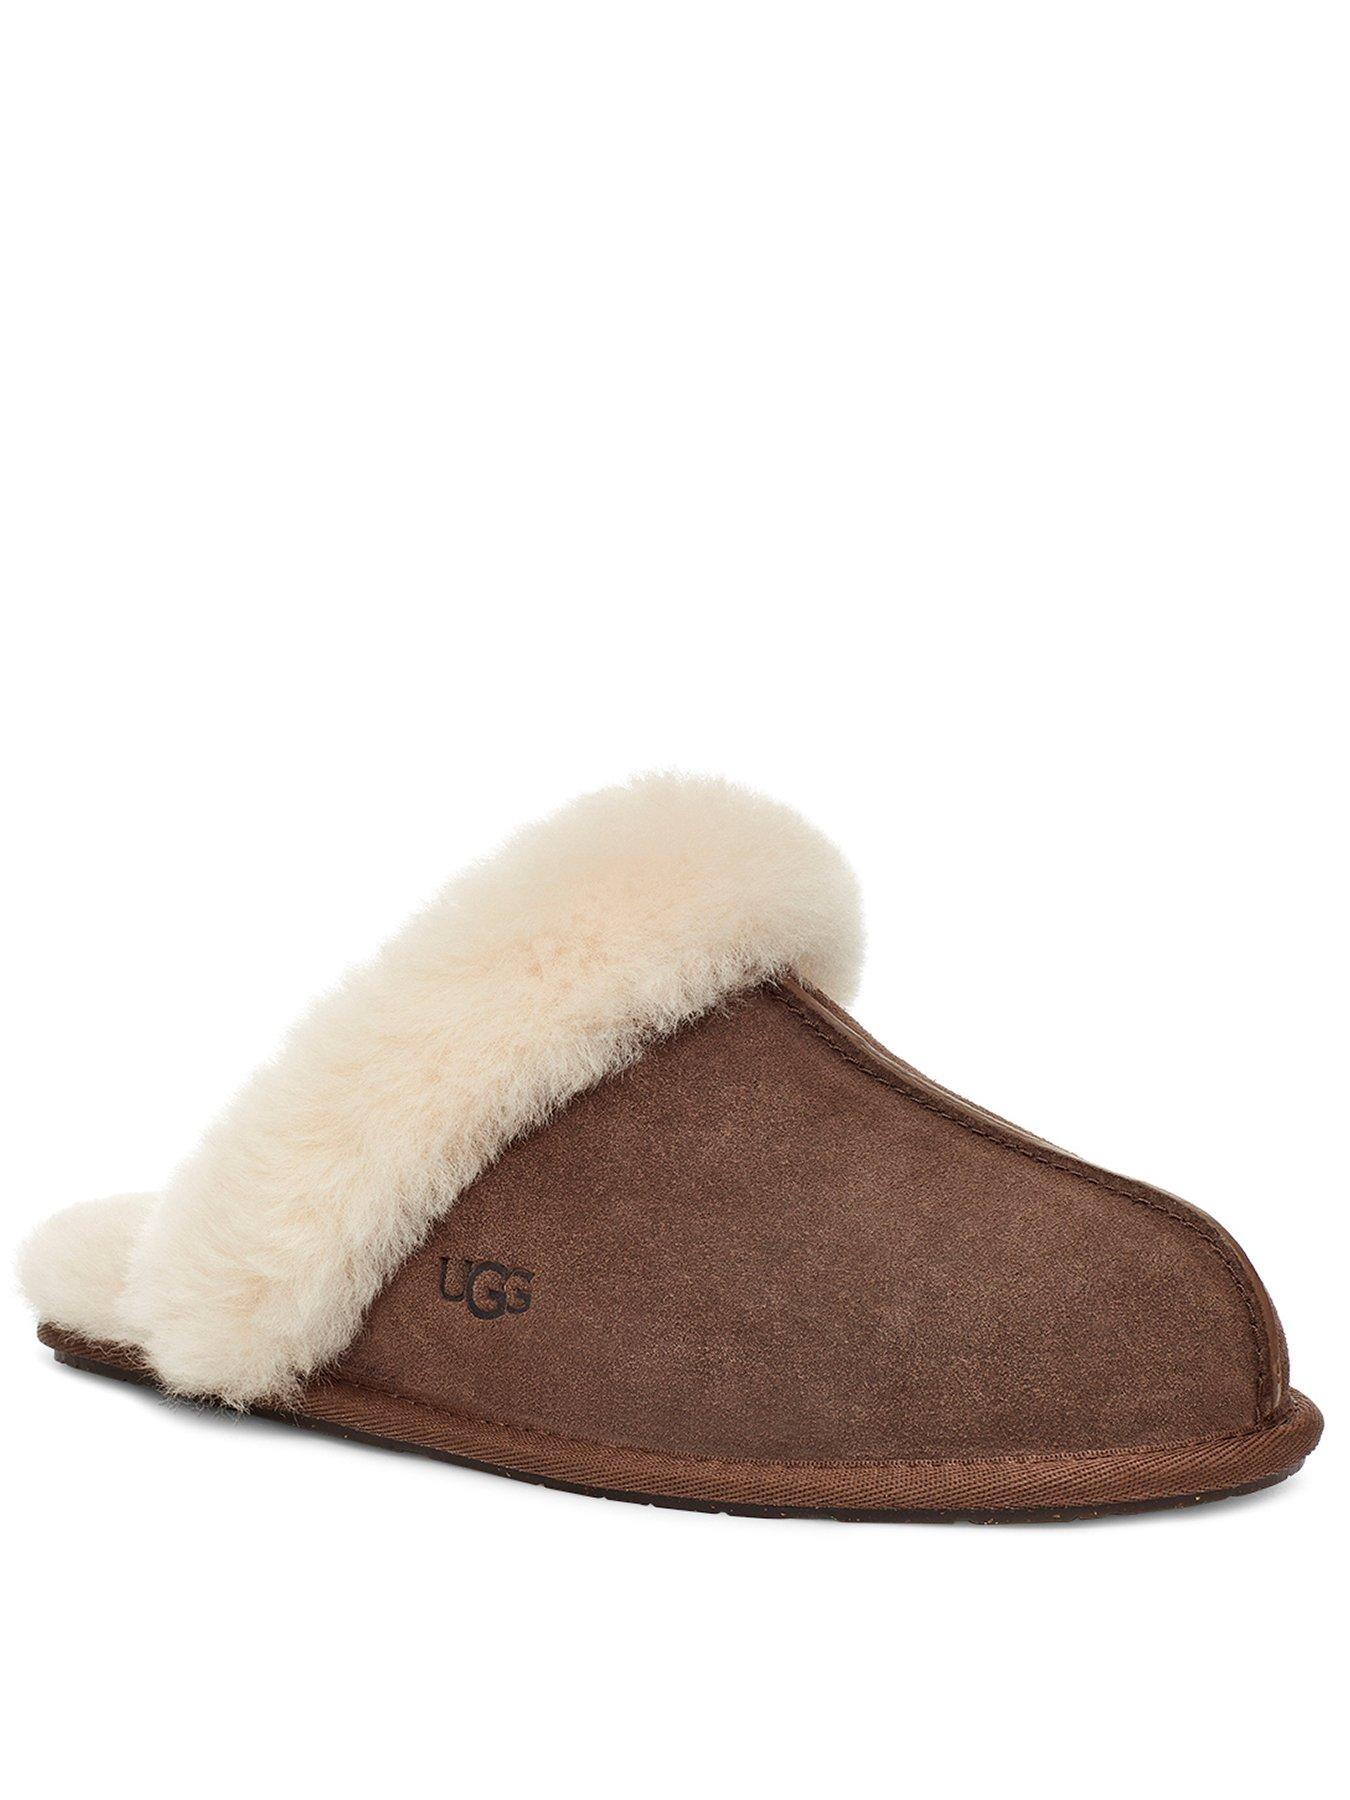 ugg slippers brown thomas